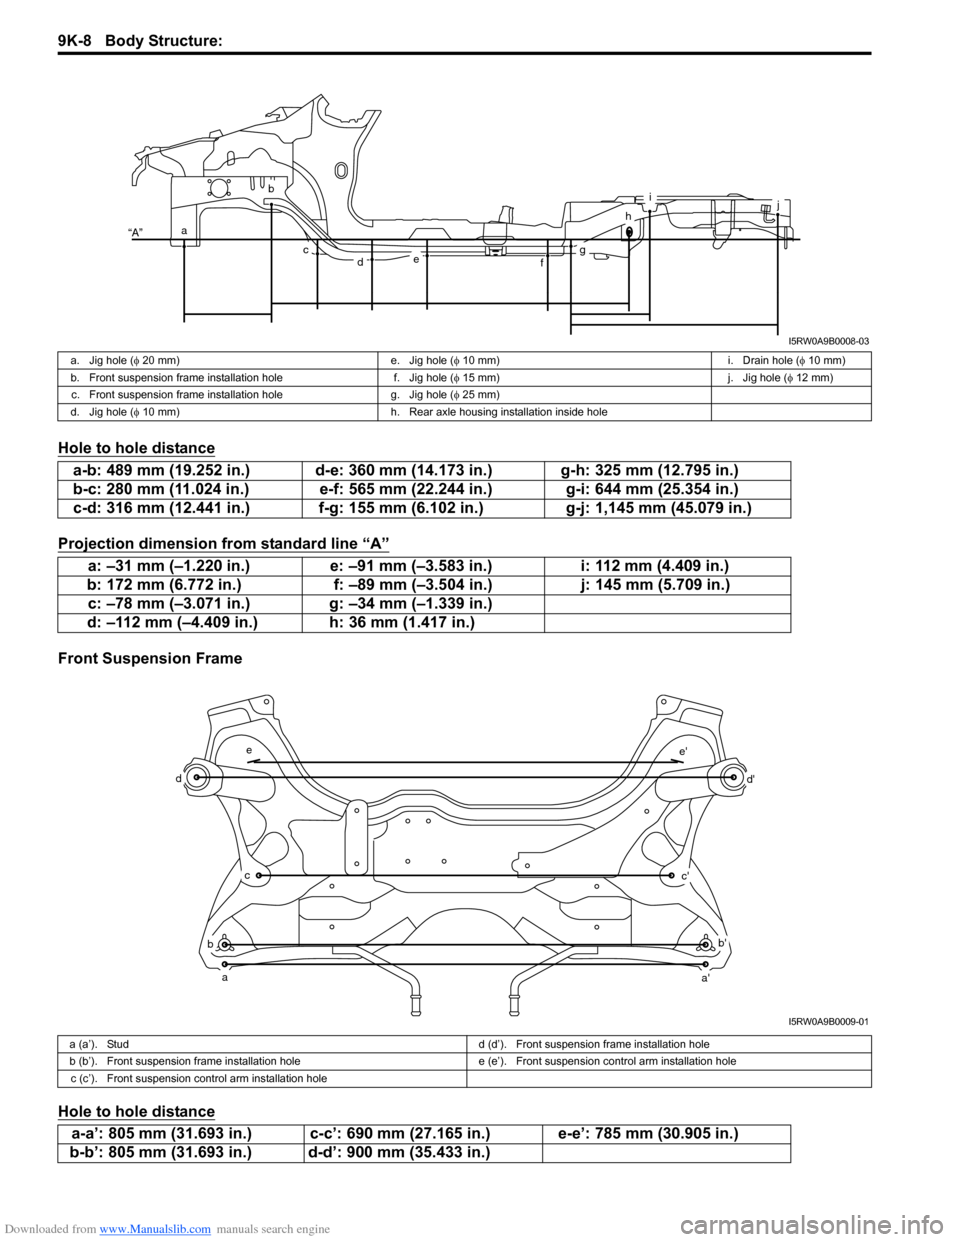 SUZUKI SX4 2006 1.G Service Owners Guide Downloaded from www.Manualslib.com manuals search engine 9K-8 Body Structure: 
Hole to hole distance
Projection dimension from standard line “A”
Front Suspension Frame
Hole to hole distance
a
b
cd